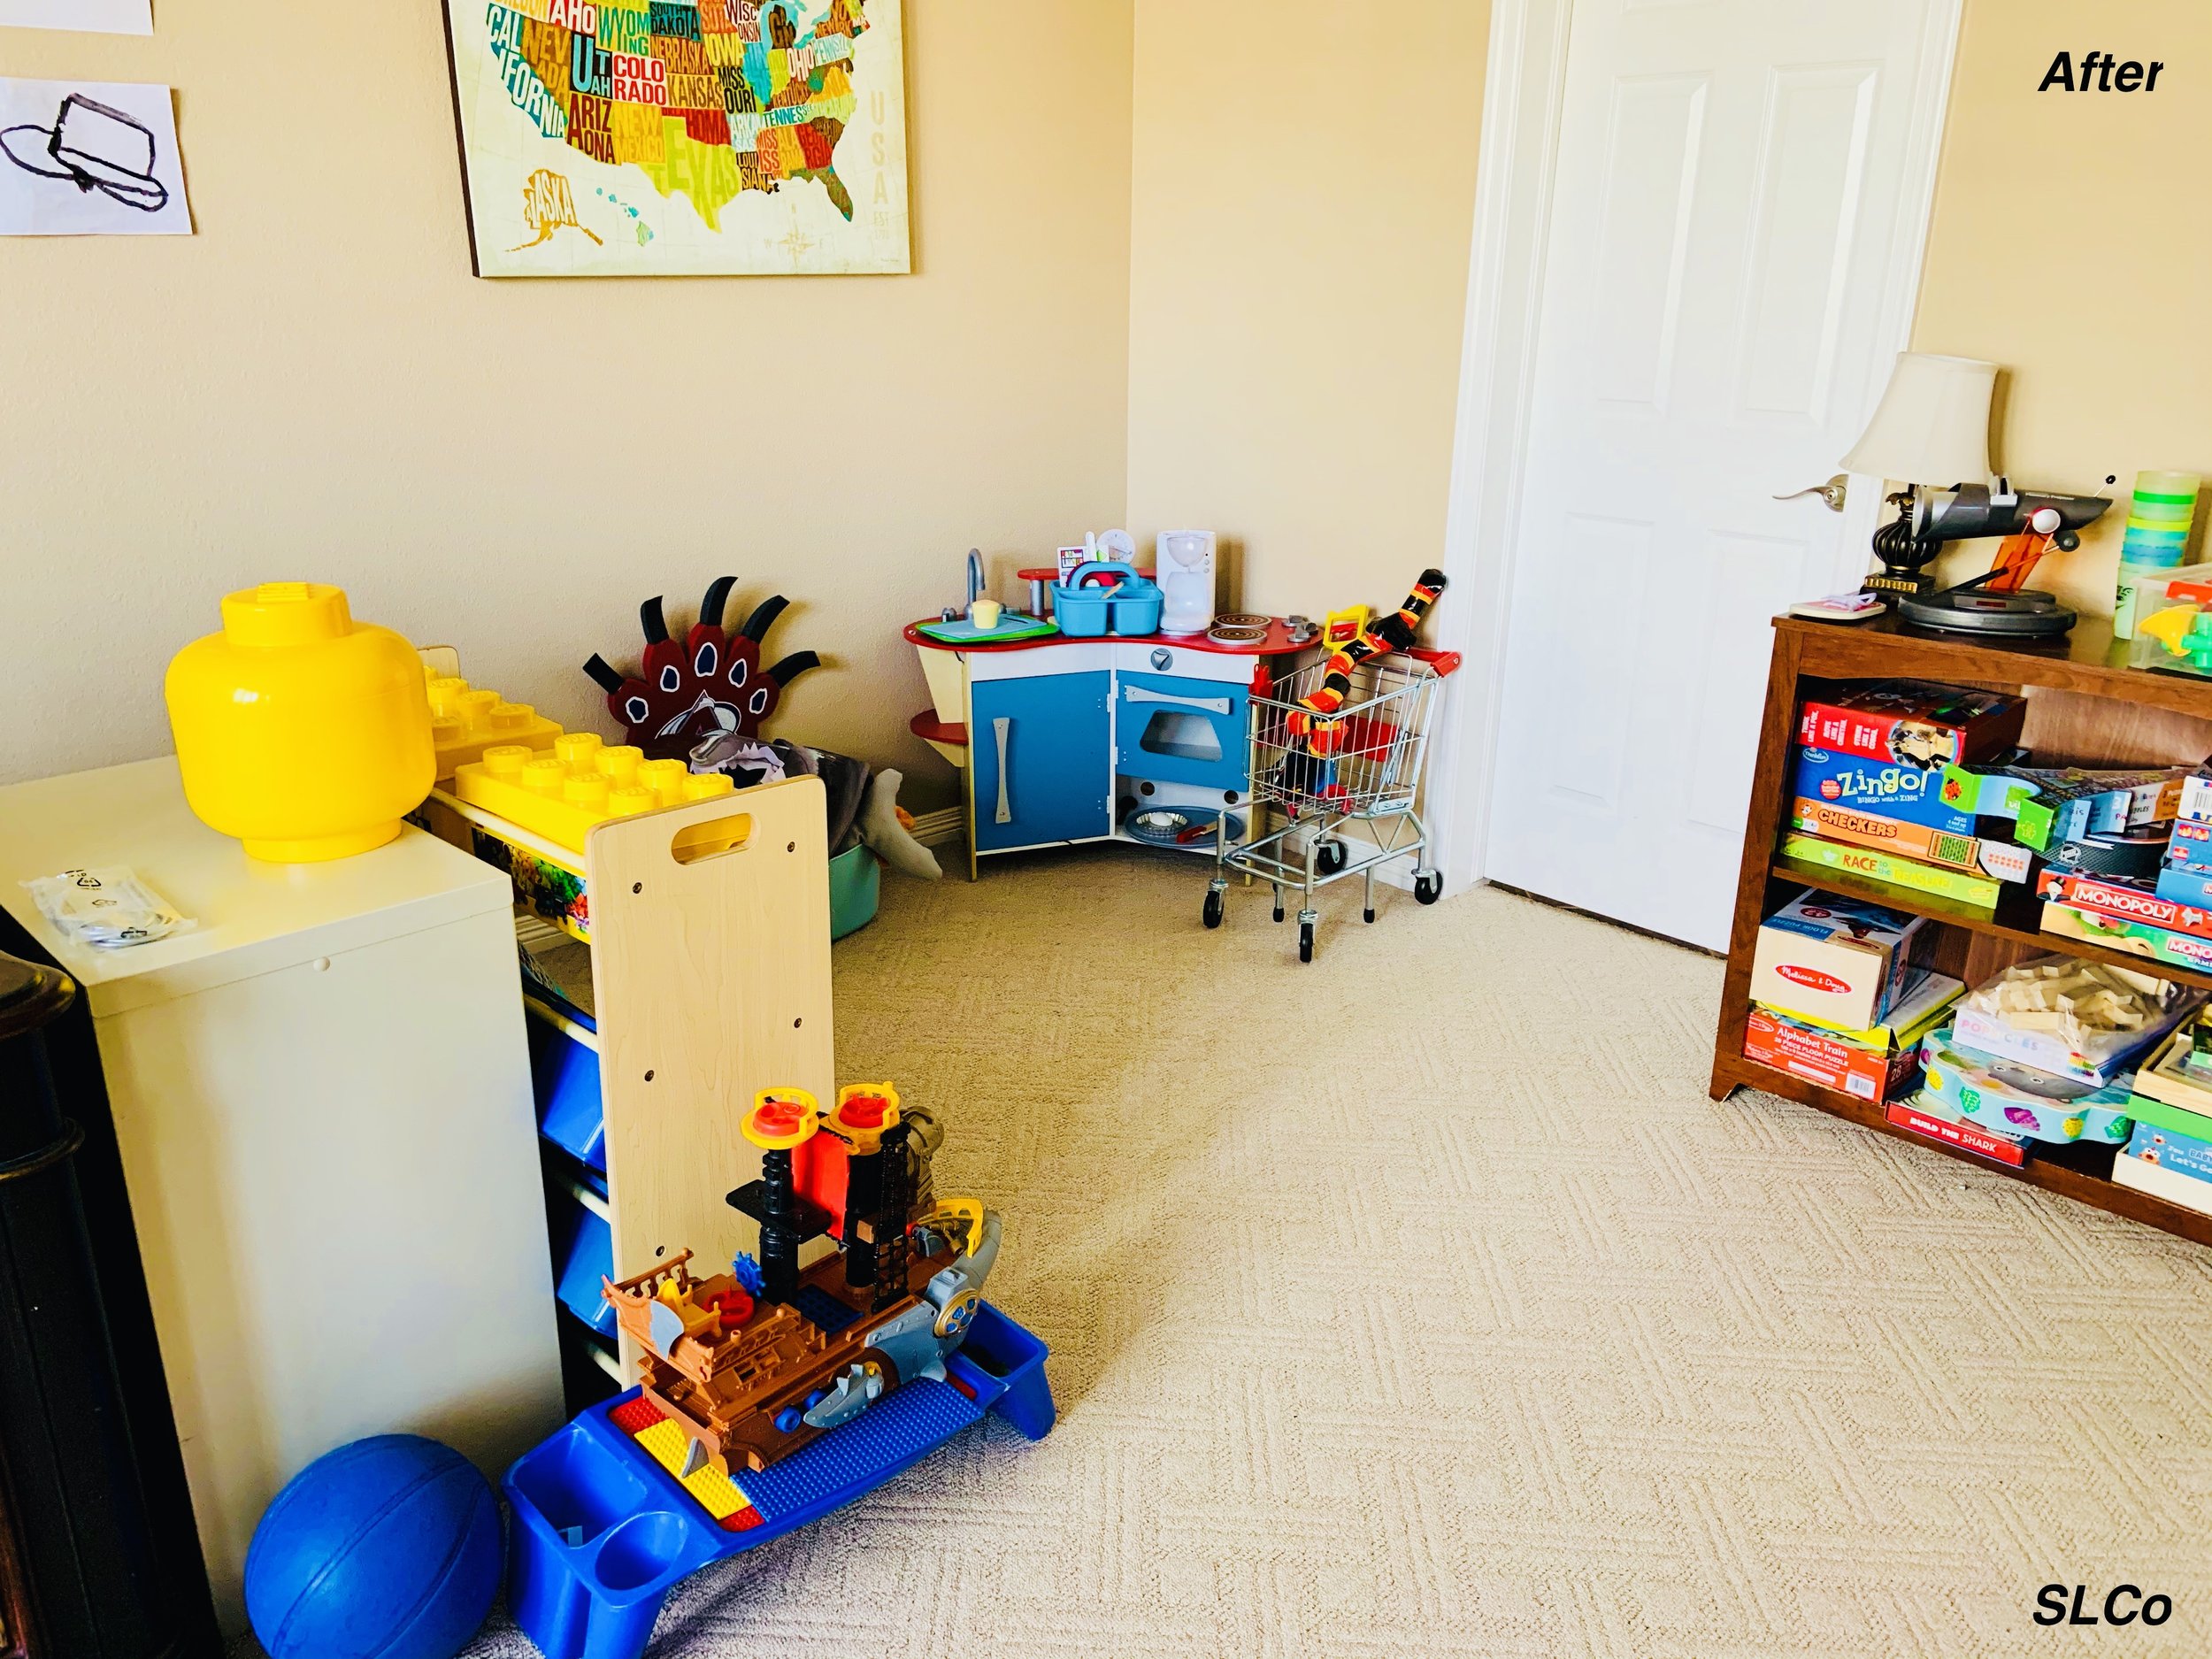 After photo of playroom with two small shelving units with items neatly organized and limited items on the floor.